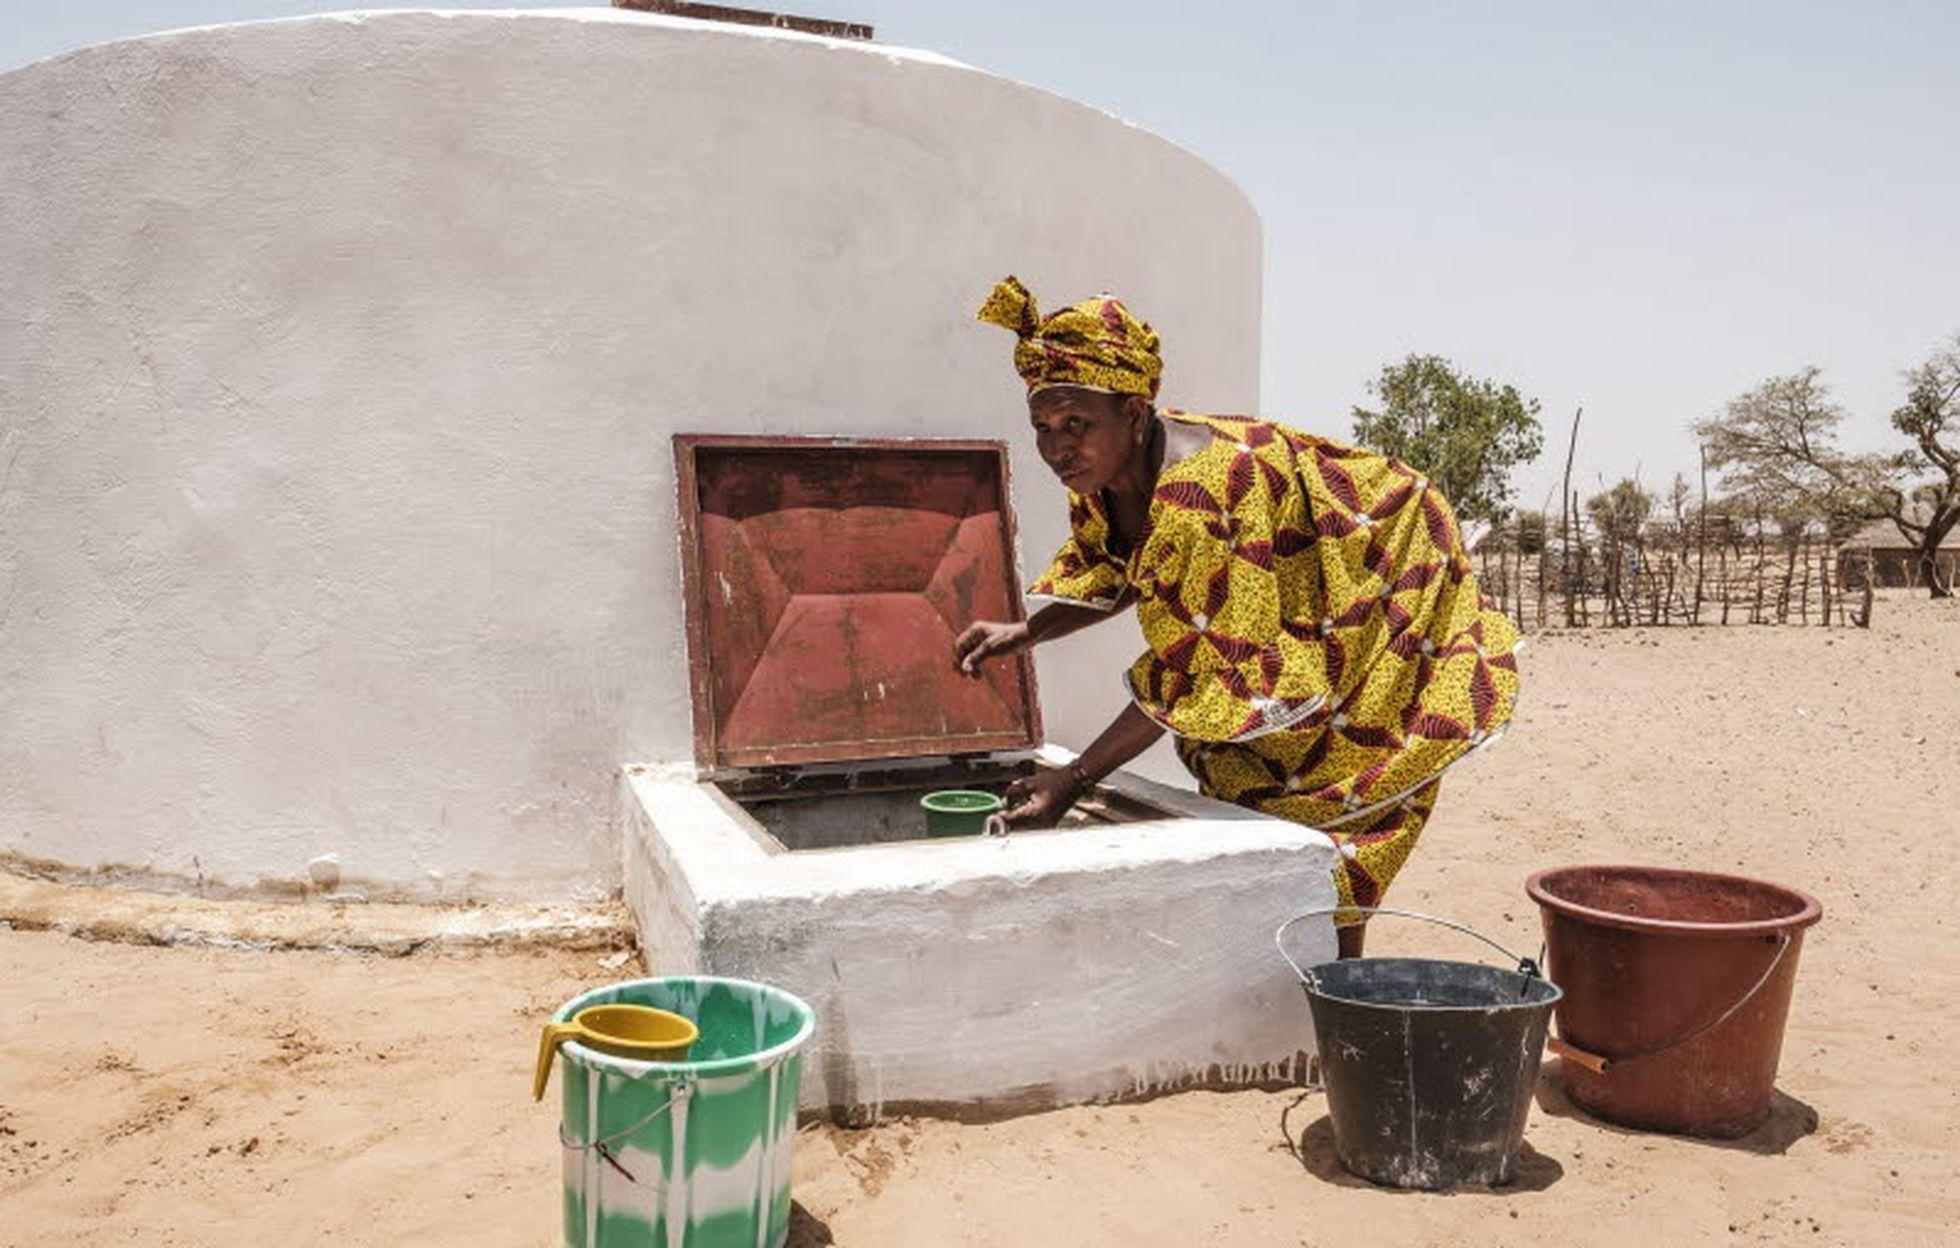 26 April 2019, village of Douly, near Touba, Senegal - Mboya Ka, beneficiary of the installation of a cistern, collecting water from a cistern in the village of Douly. The village is part of the initiative